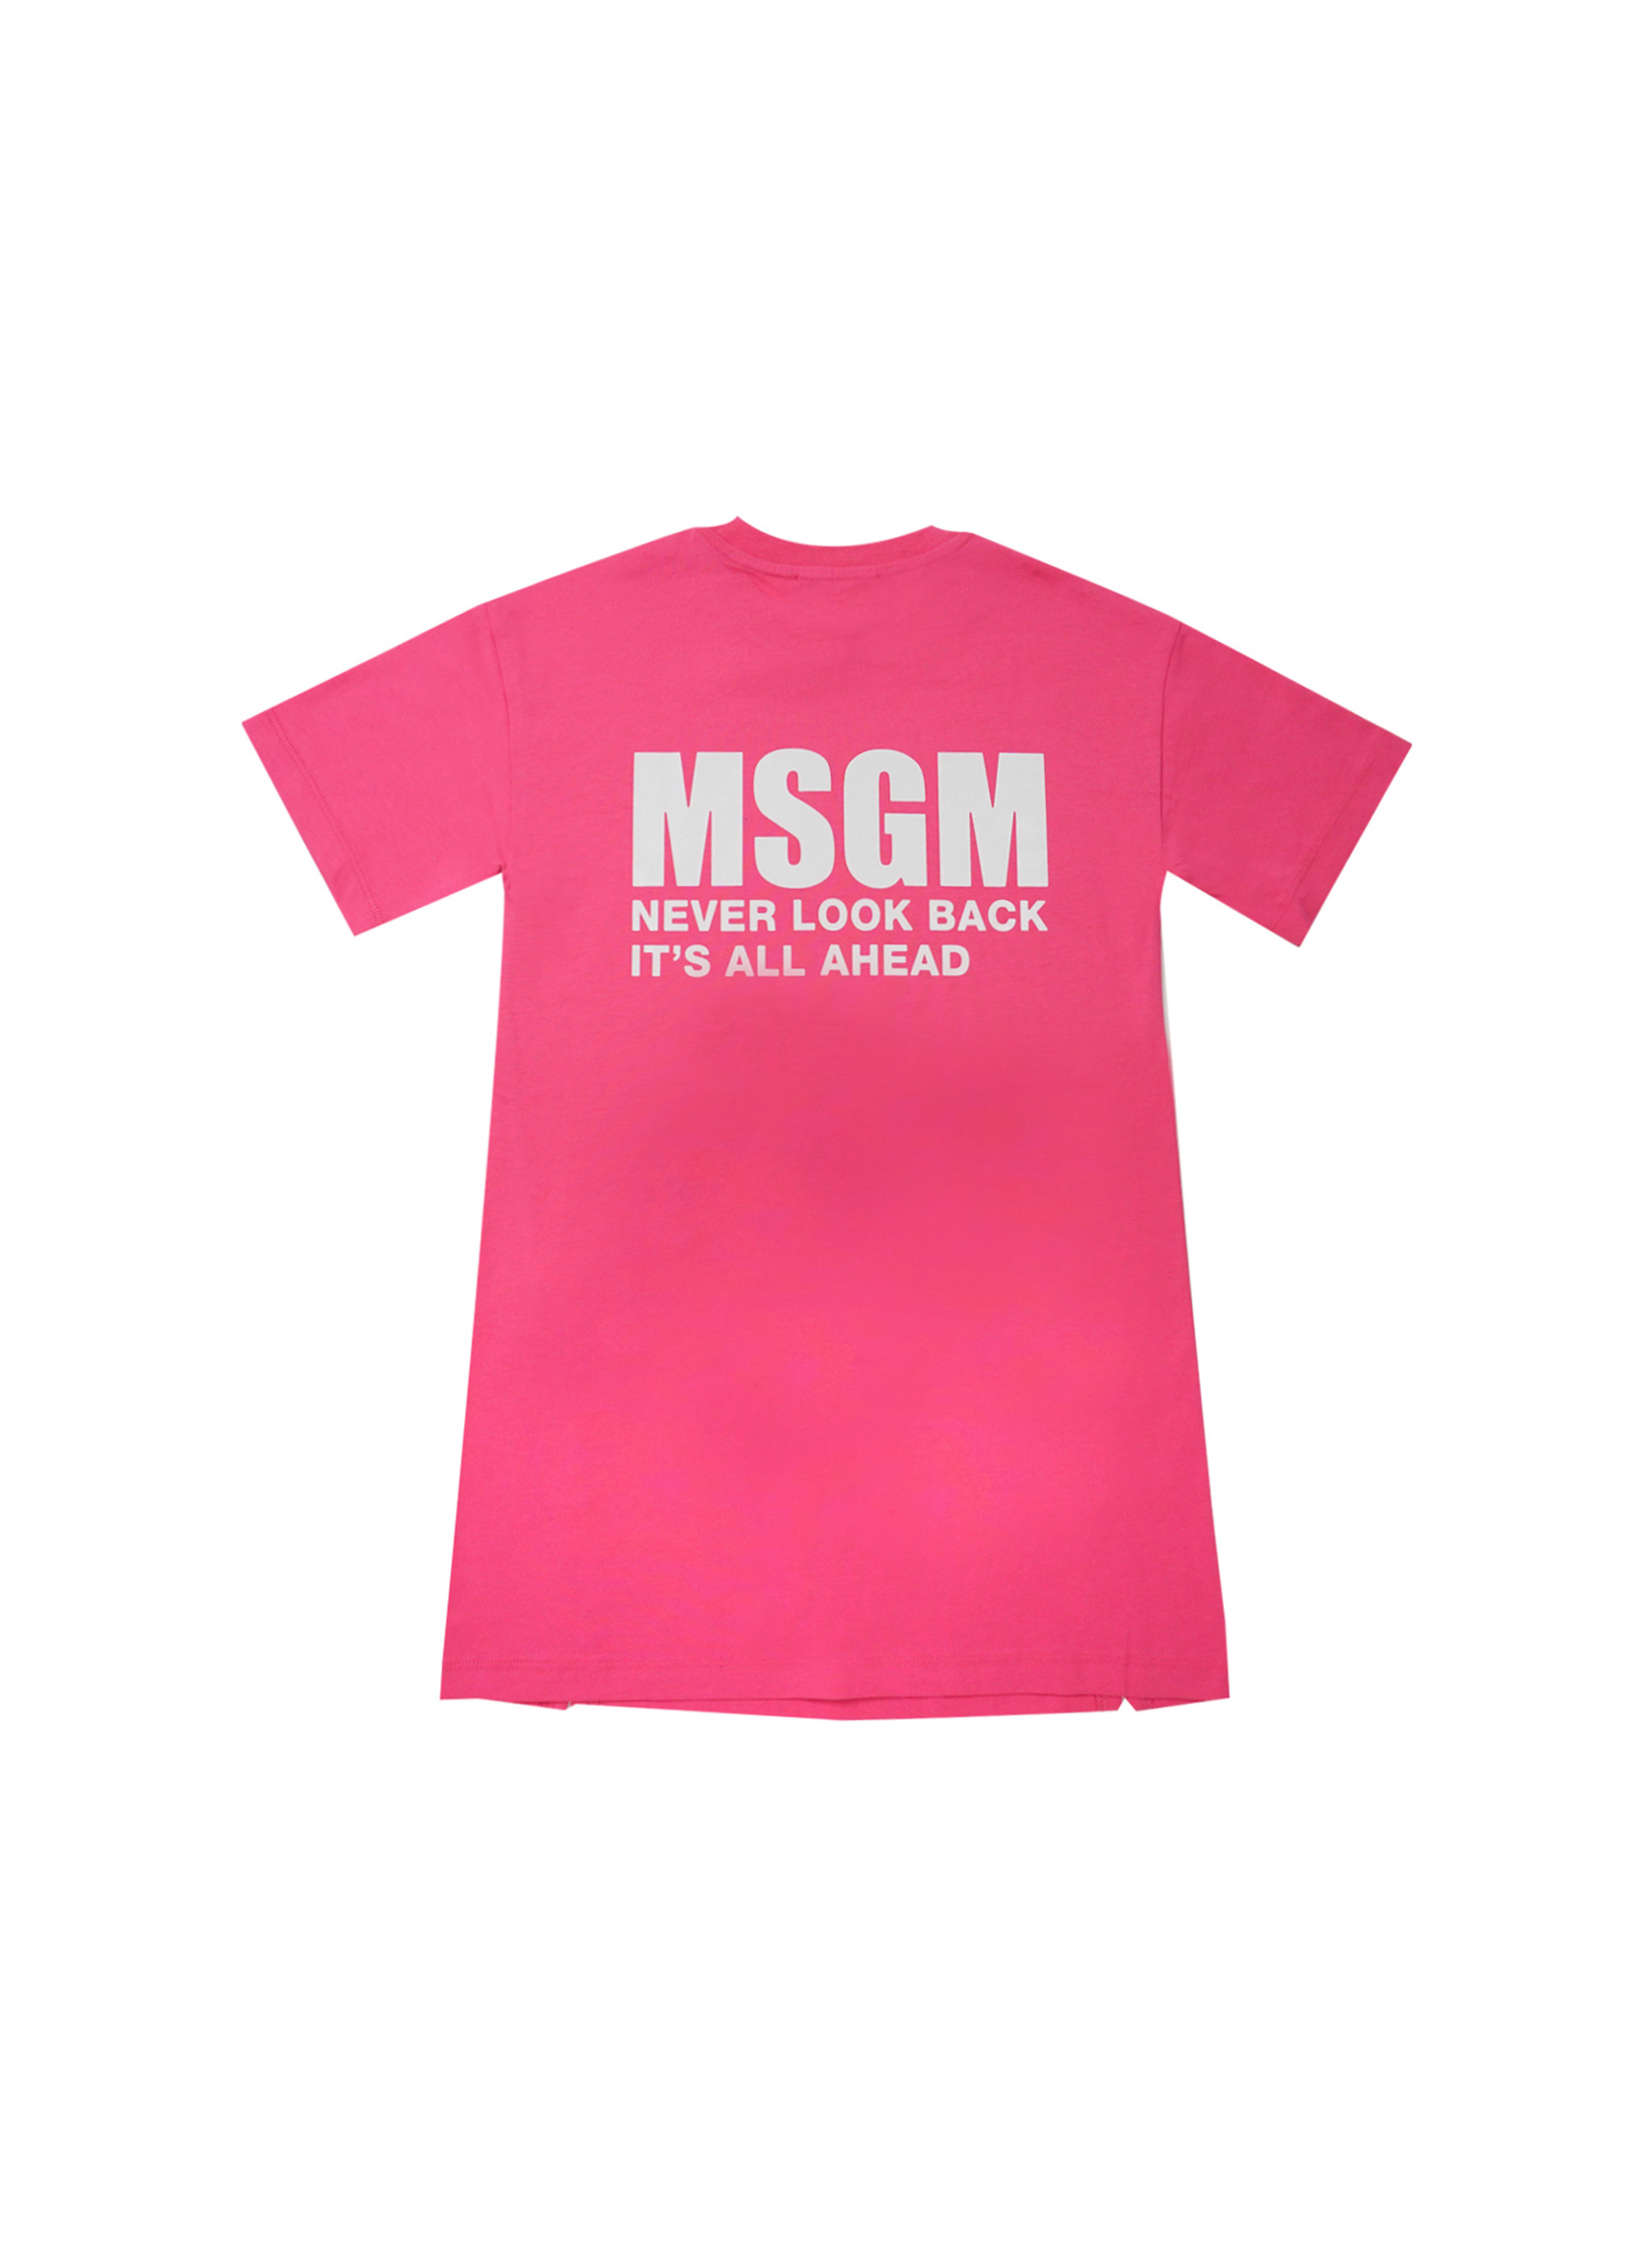 MSGM KIDS NEVER LOOK BACK ステートメントロゴ Tシャツワンピース 詳細画像 フューシャピンク 2